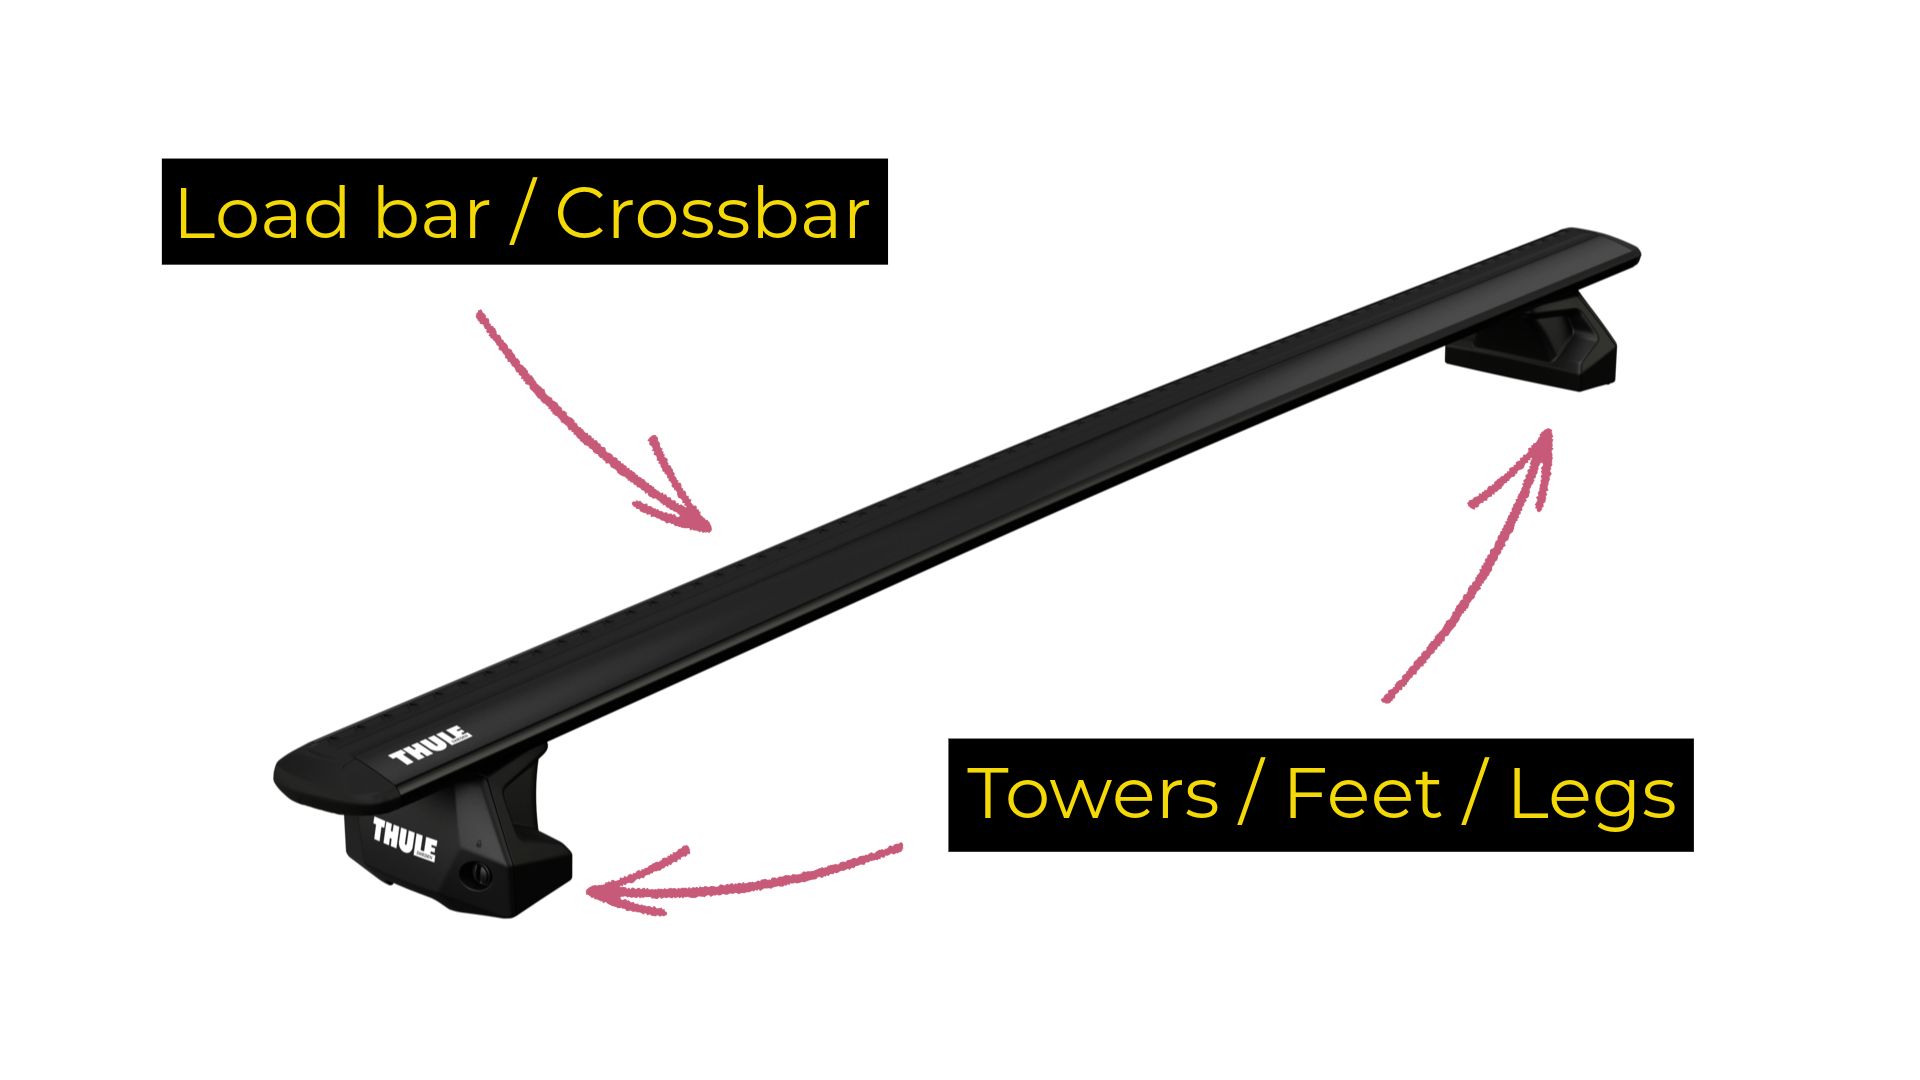 A Diagram of a complete roof rack